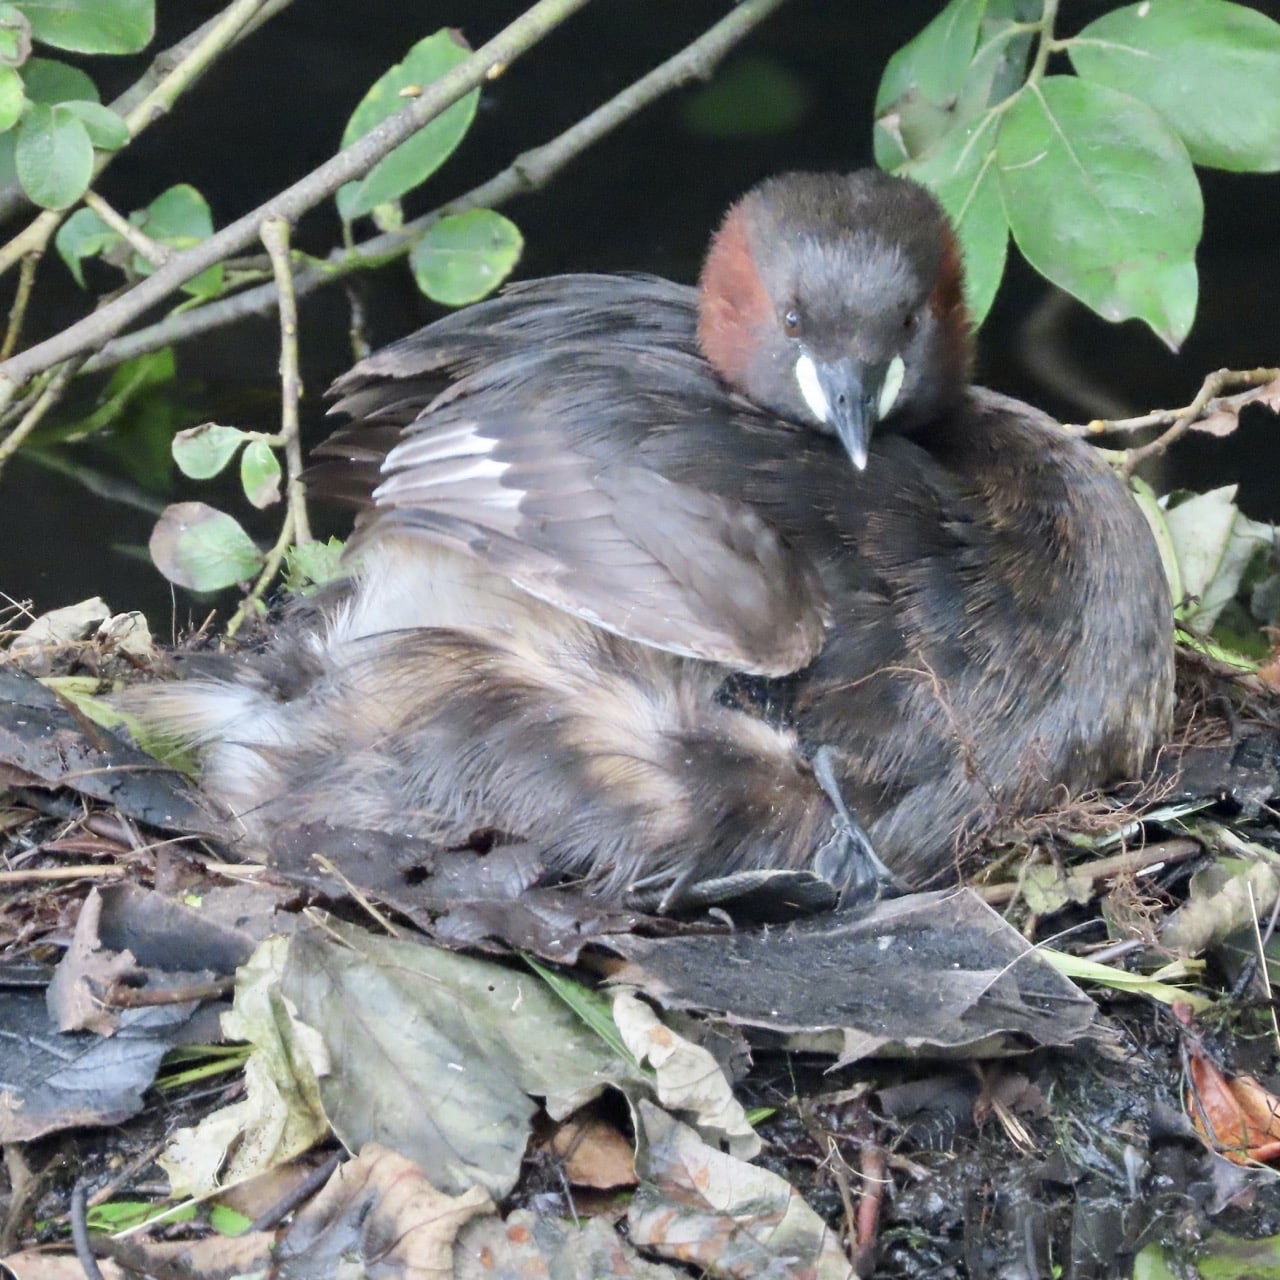 Dabchick on nest, foot of youngster under wind visible 